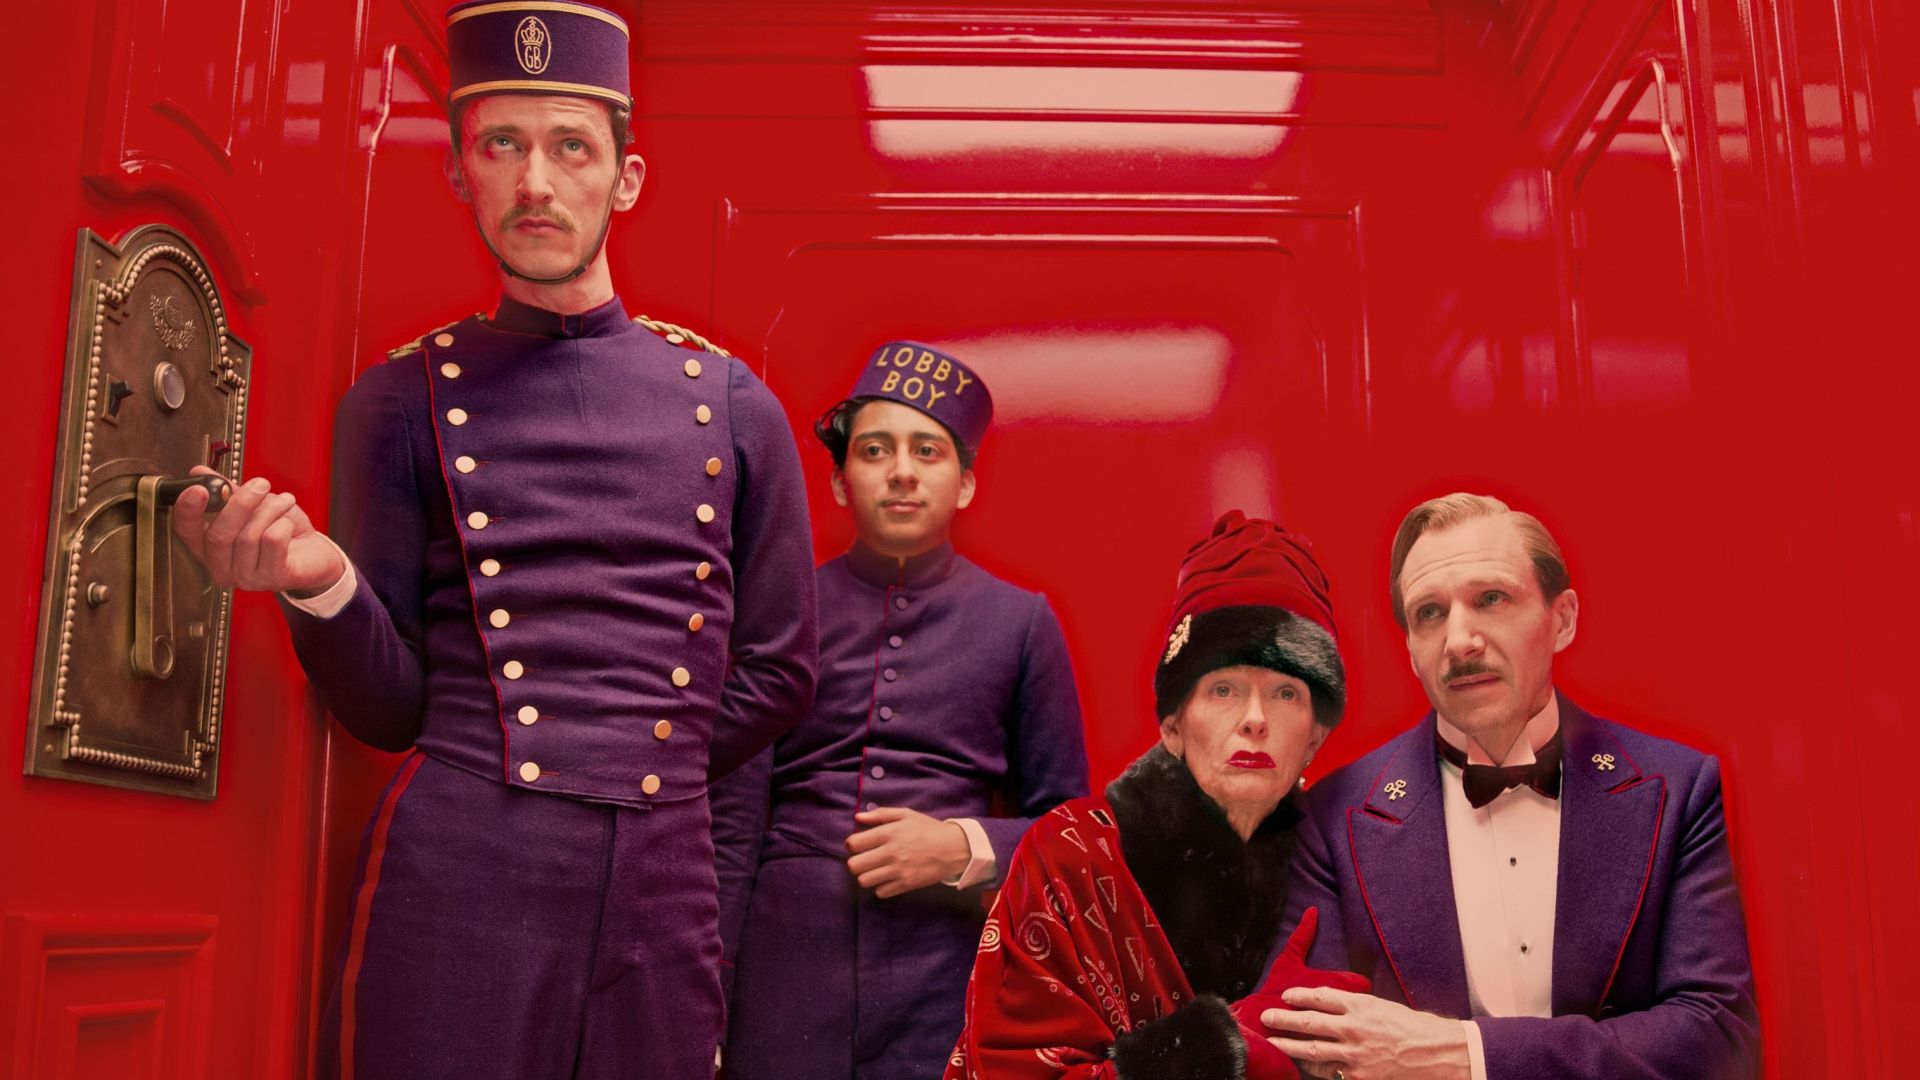 <p>                     In terms of visual style, few directors working today are as immediately recognizable as Wes Anderson. You can tell almost instantaneously if you’re watching one of his films from the intricate, almost dollhouse like settings to his increasing use of unique aspect ratios and, generally, if you see either Bill Murray or Owen Wilson on screen.                    </p>                                      <p>                     Anderson is one of the more unique American directors to come about in a long time, treating audiences to 10 movies thus far. But which is his best?                   </p>                                      <p>                     Sticking with just his feature films, none of his short films (sorry fans of the original Bottle Rocket), here is how we’ve ranked Wes Anderson’s filmography to date.                   </p>